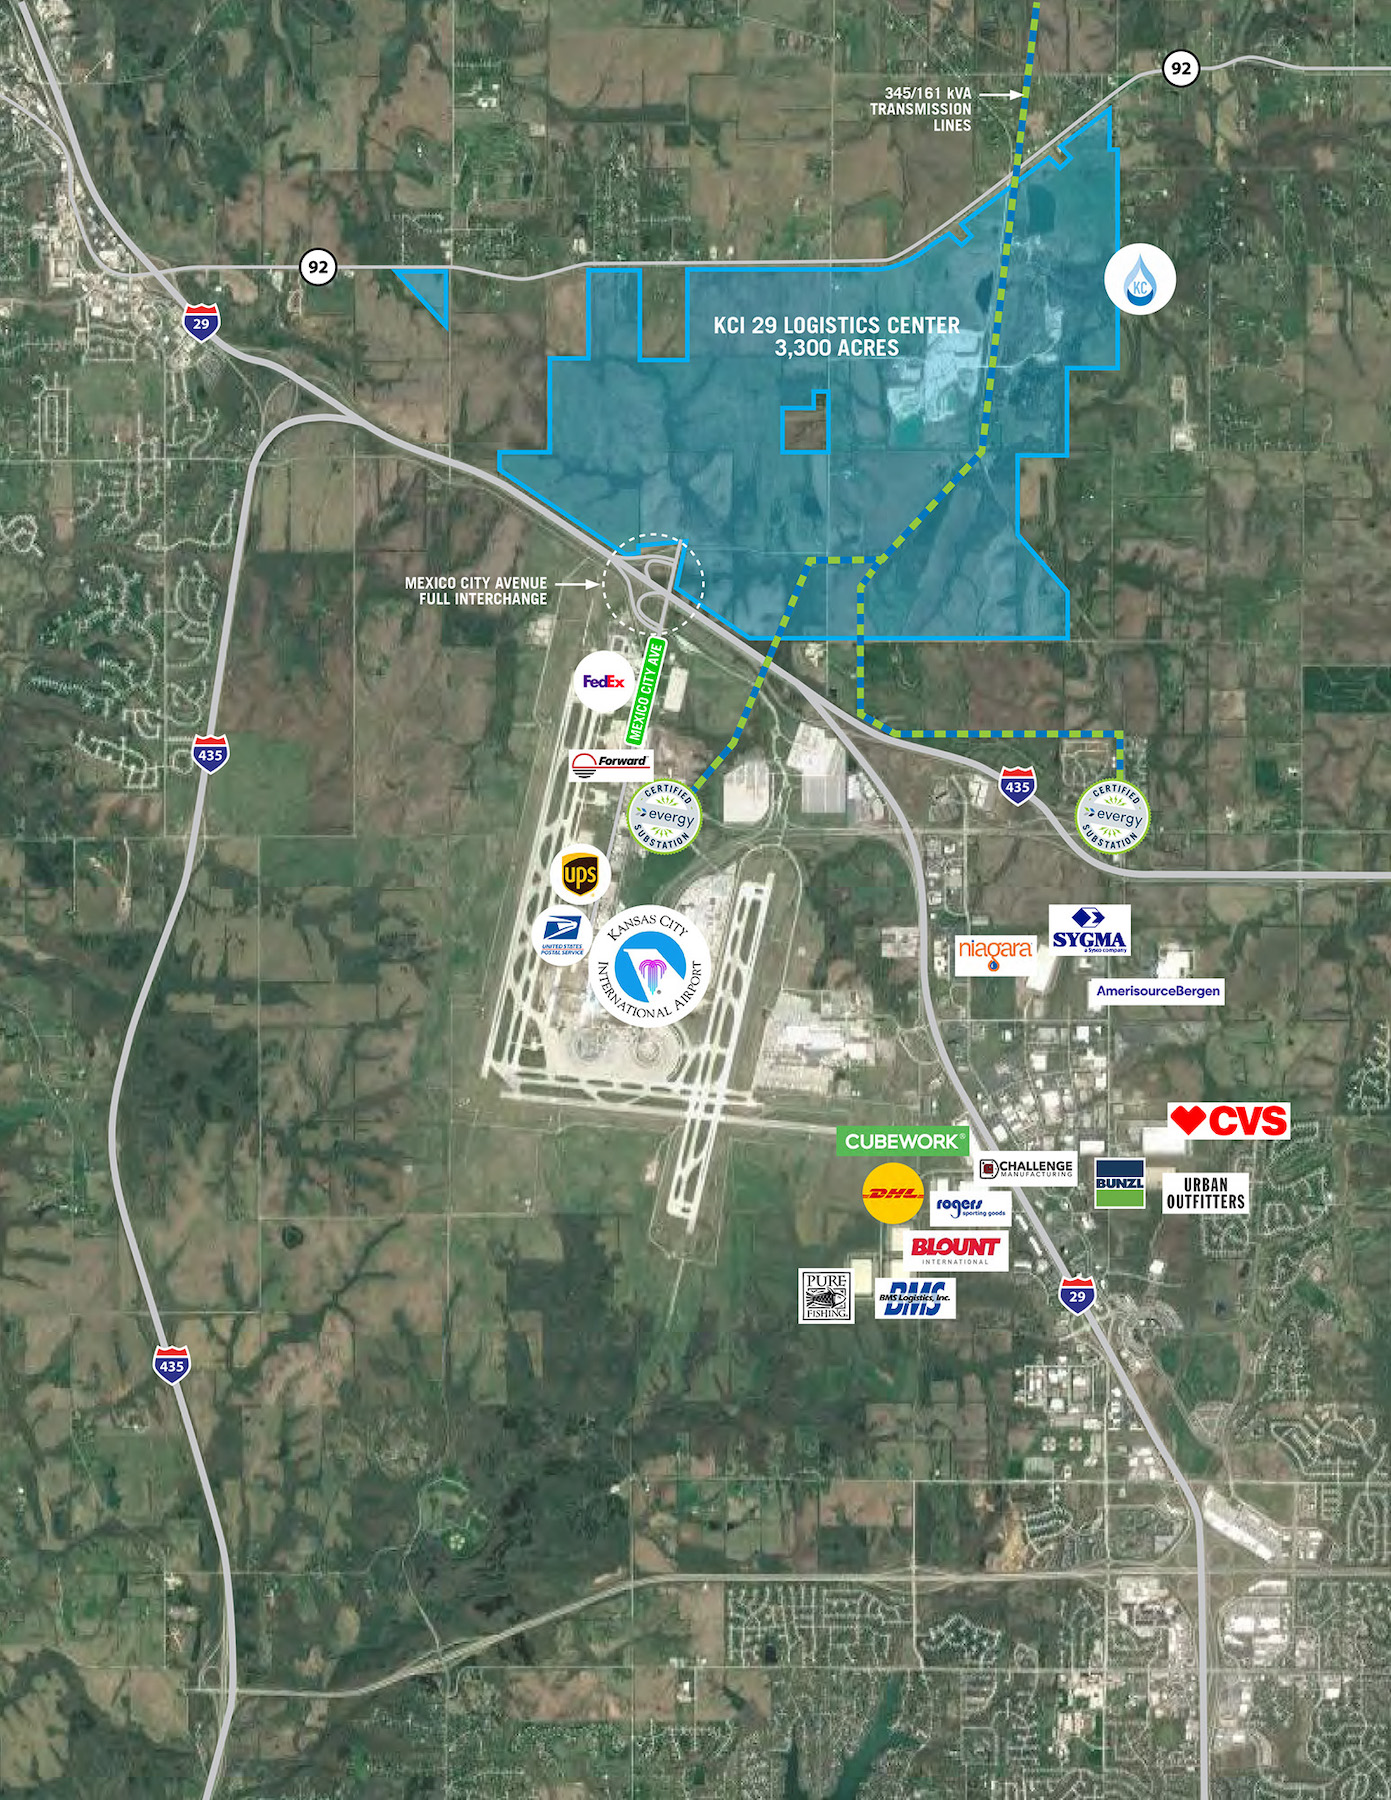 The 3,300 acres is next to Kansas City International Airport.